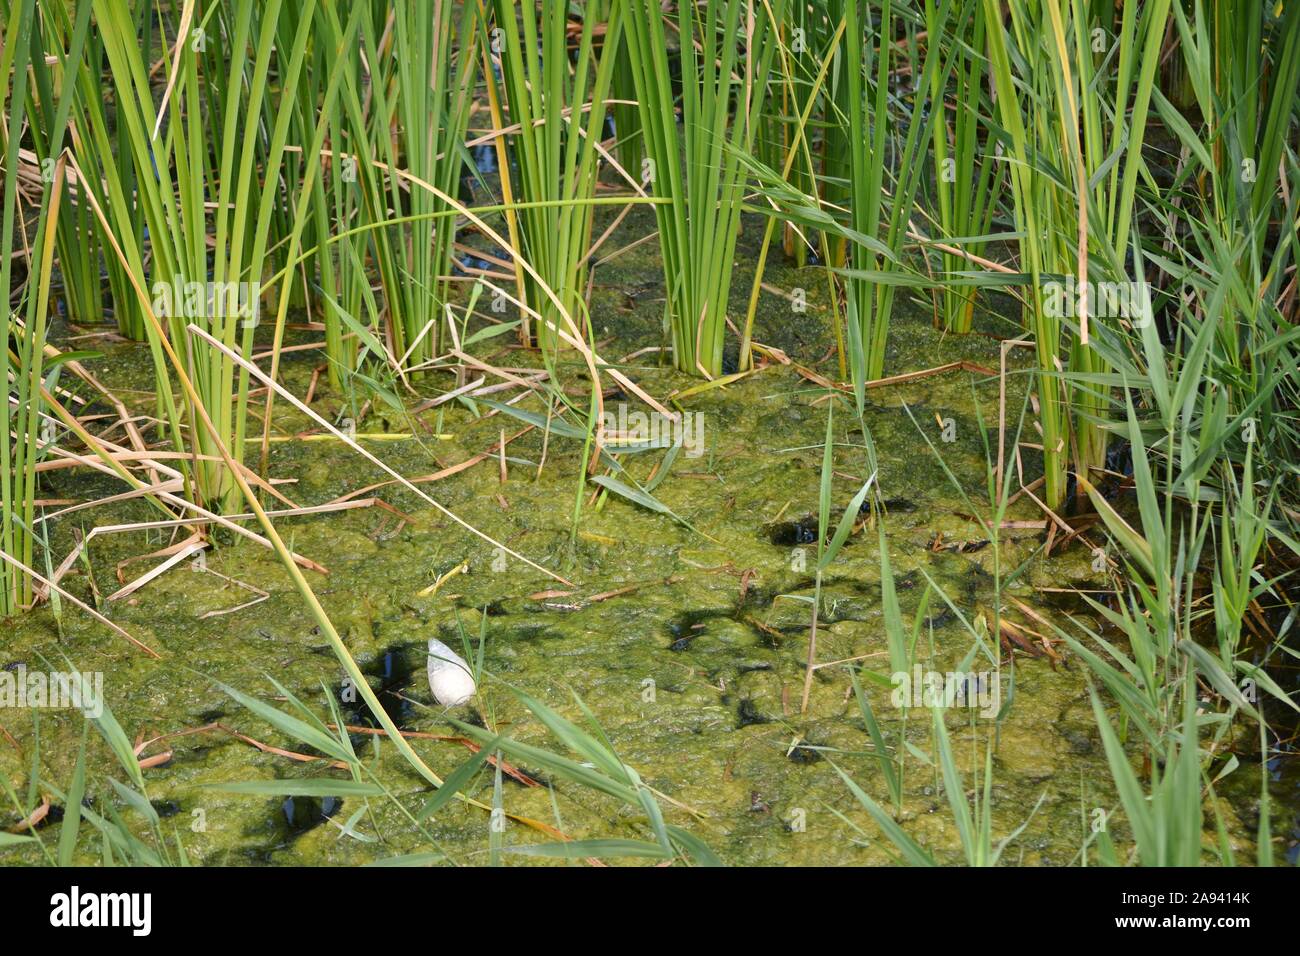 plants, algae and plastic in stagnant water Stock Photo